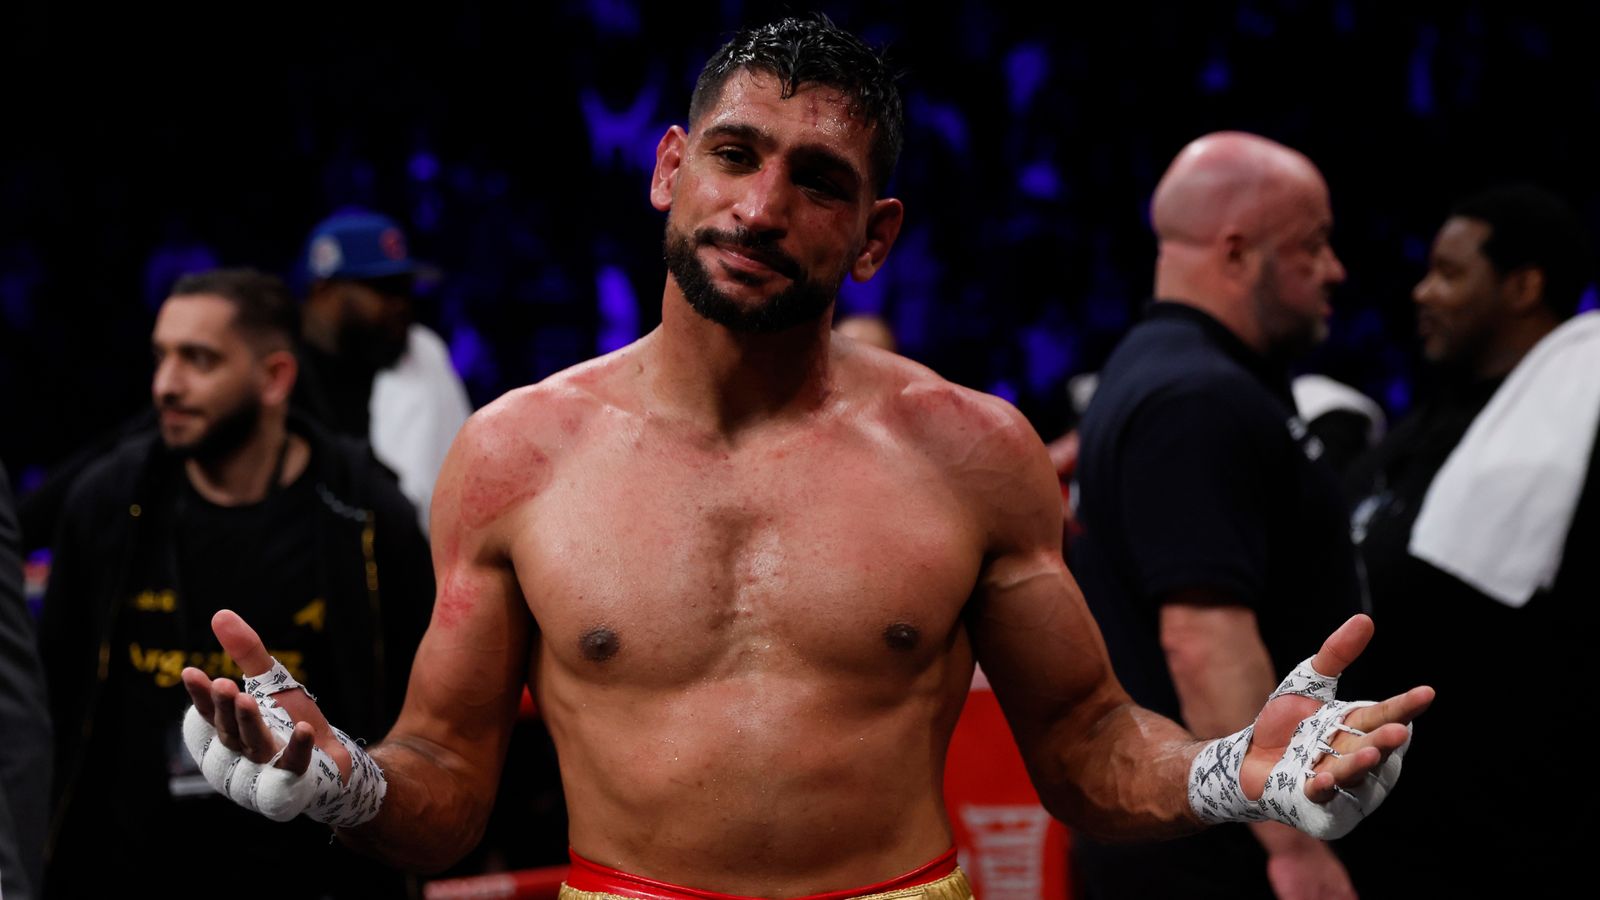 Boxer Amir Khan banned from sport for two years after testing positive for banned substance